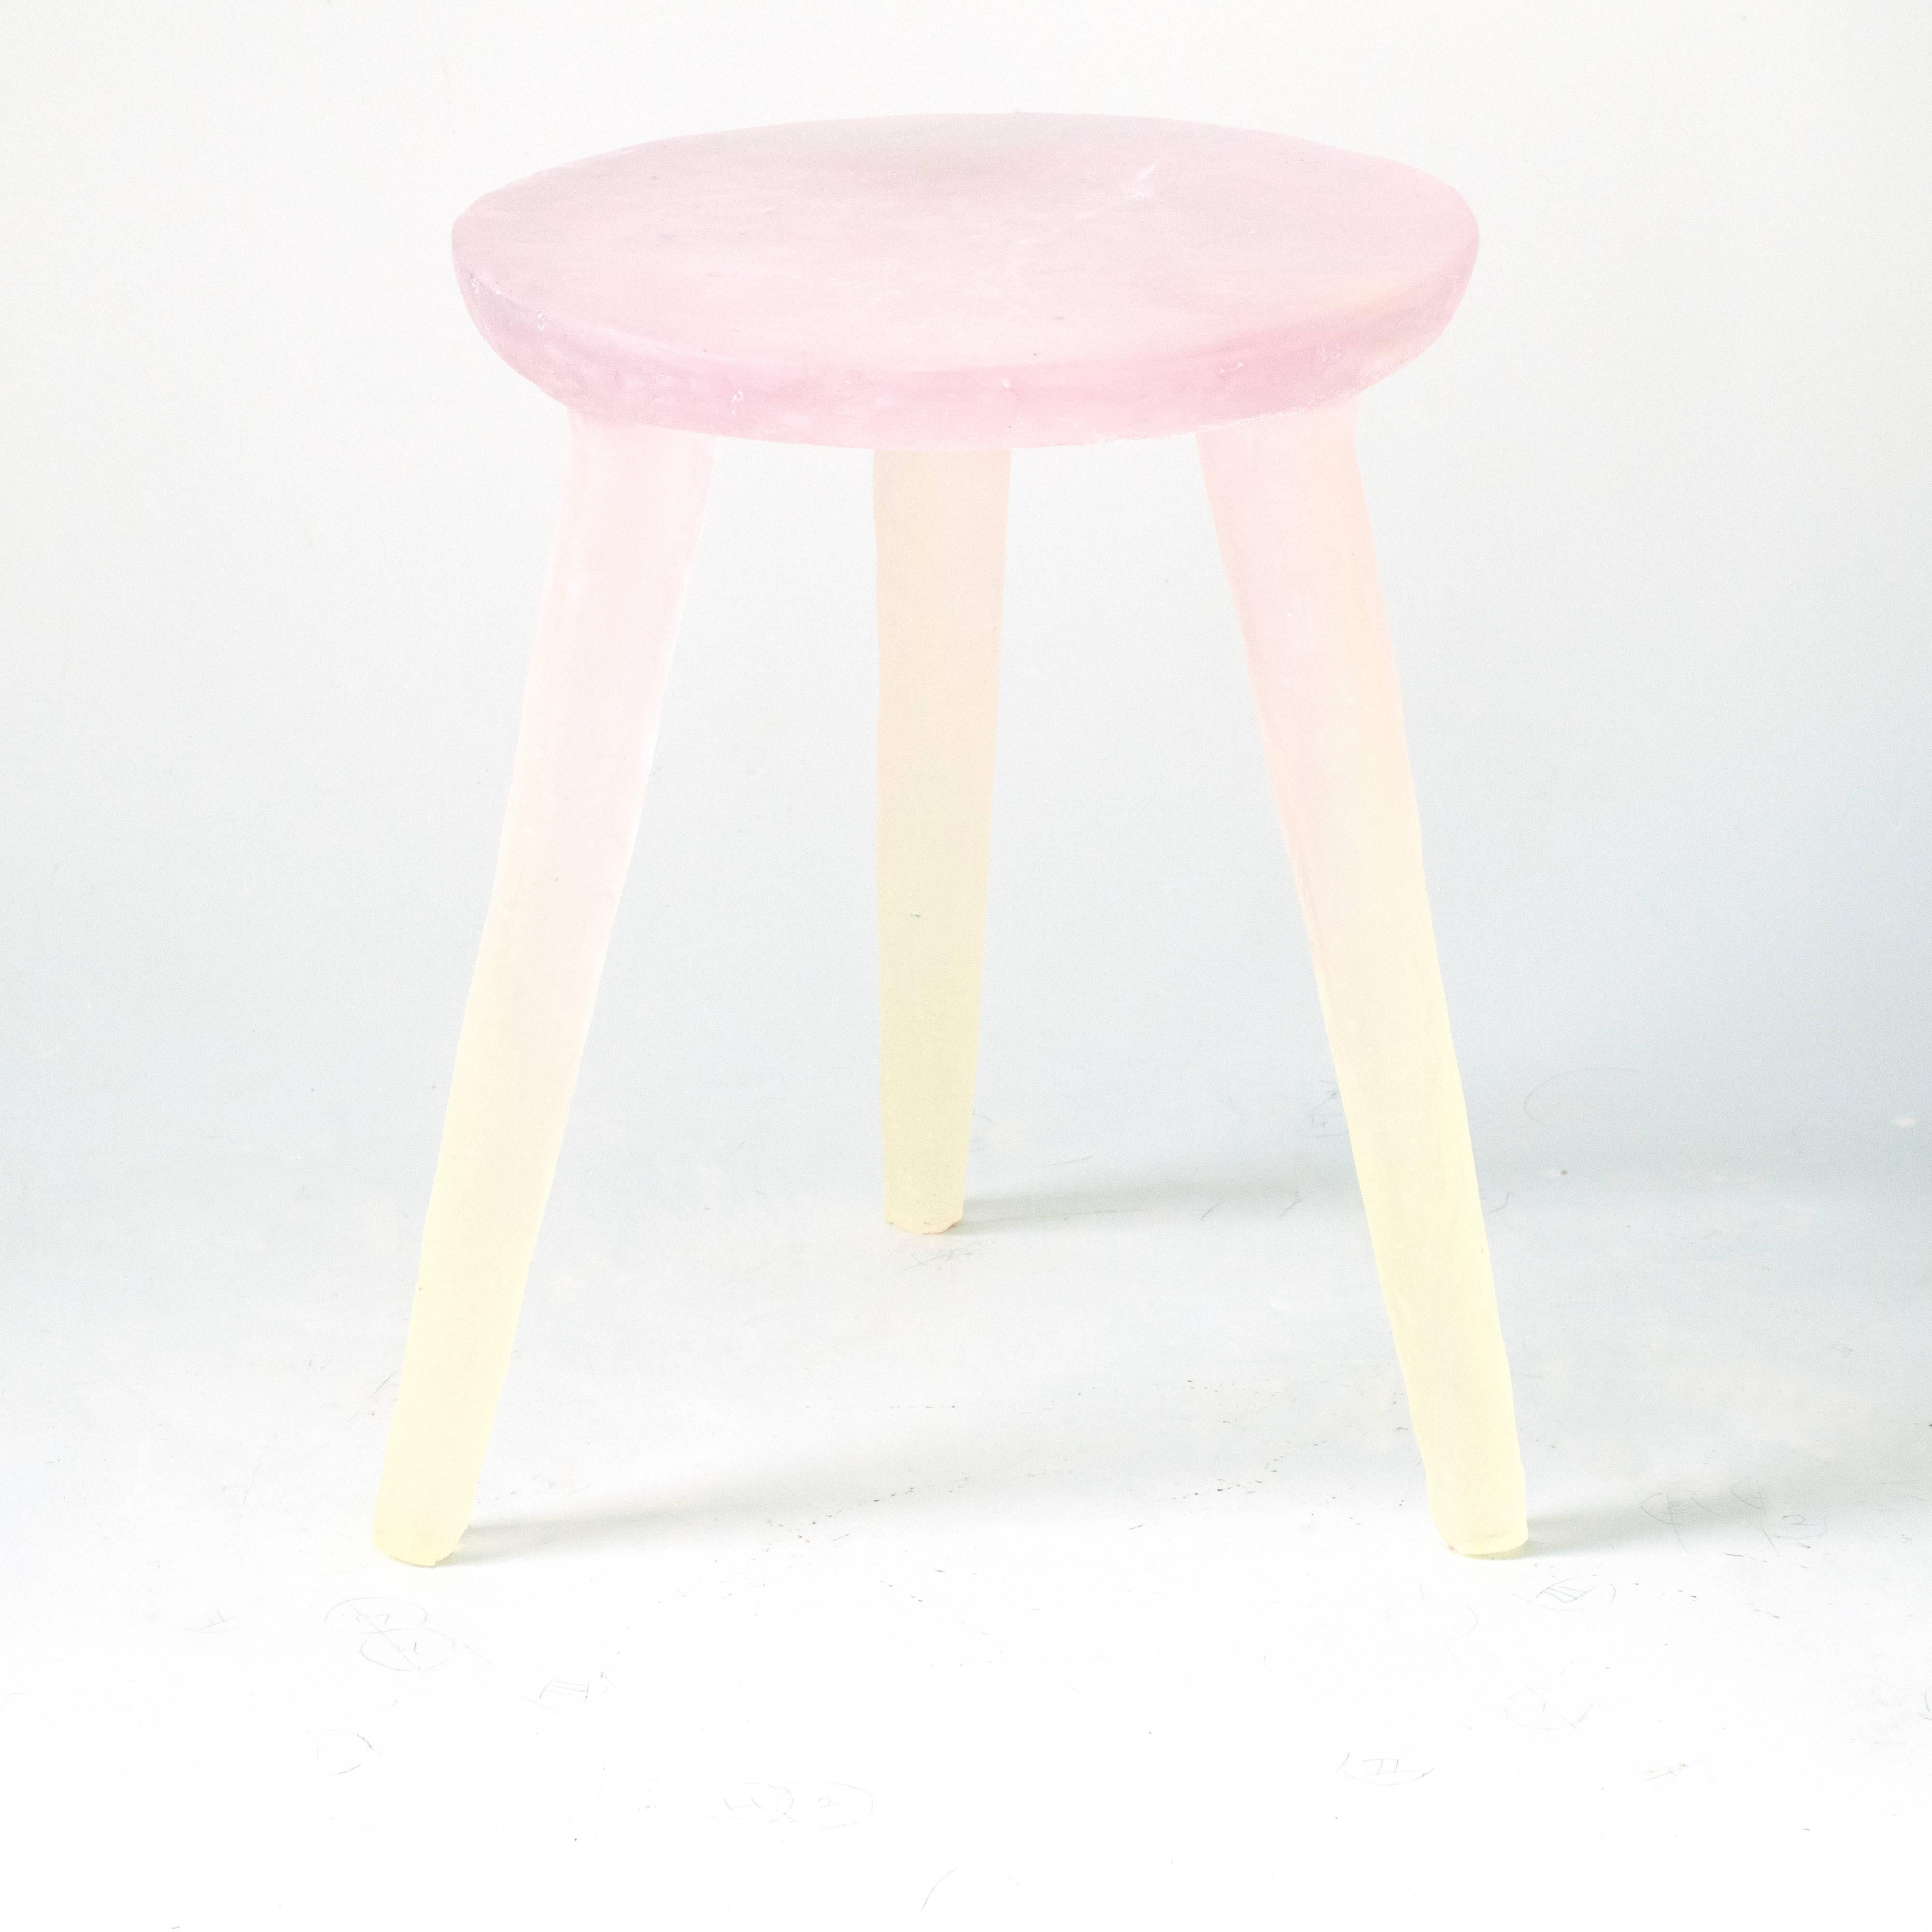 Translucent and whimsical, these can be used as side tables or stools. They are handcrafted from a variety of recycled plastics, both thermoset and thermoplastic. A specific blend of the plastics is combined in large molds. Once cured, the objects